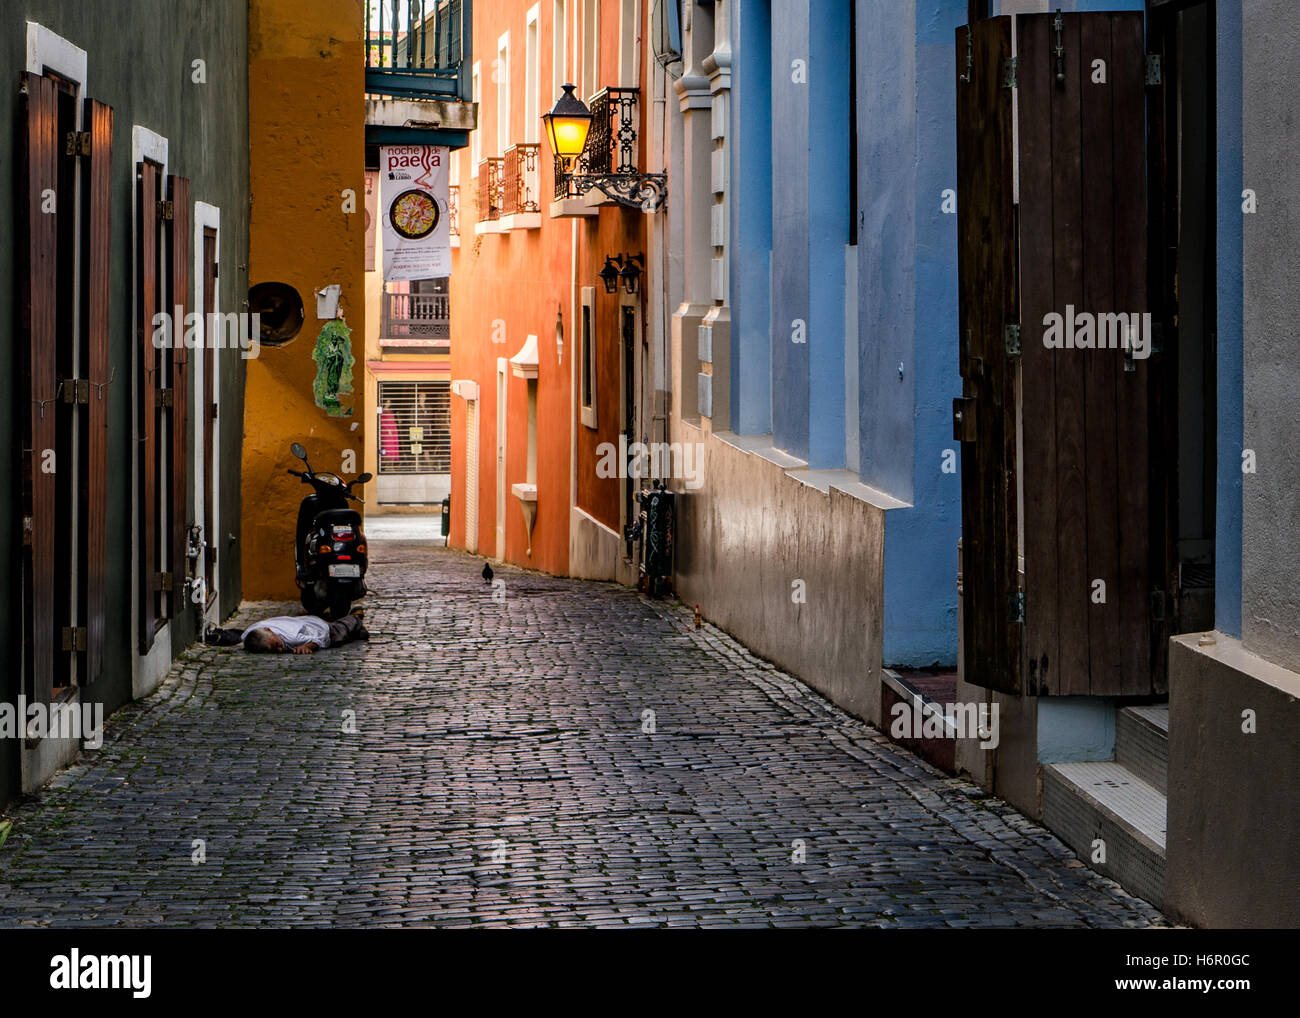 A man taking an afternoon siesta next to his scooter in an alley in Old San Juan (Puerto Rico) Stock Photo